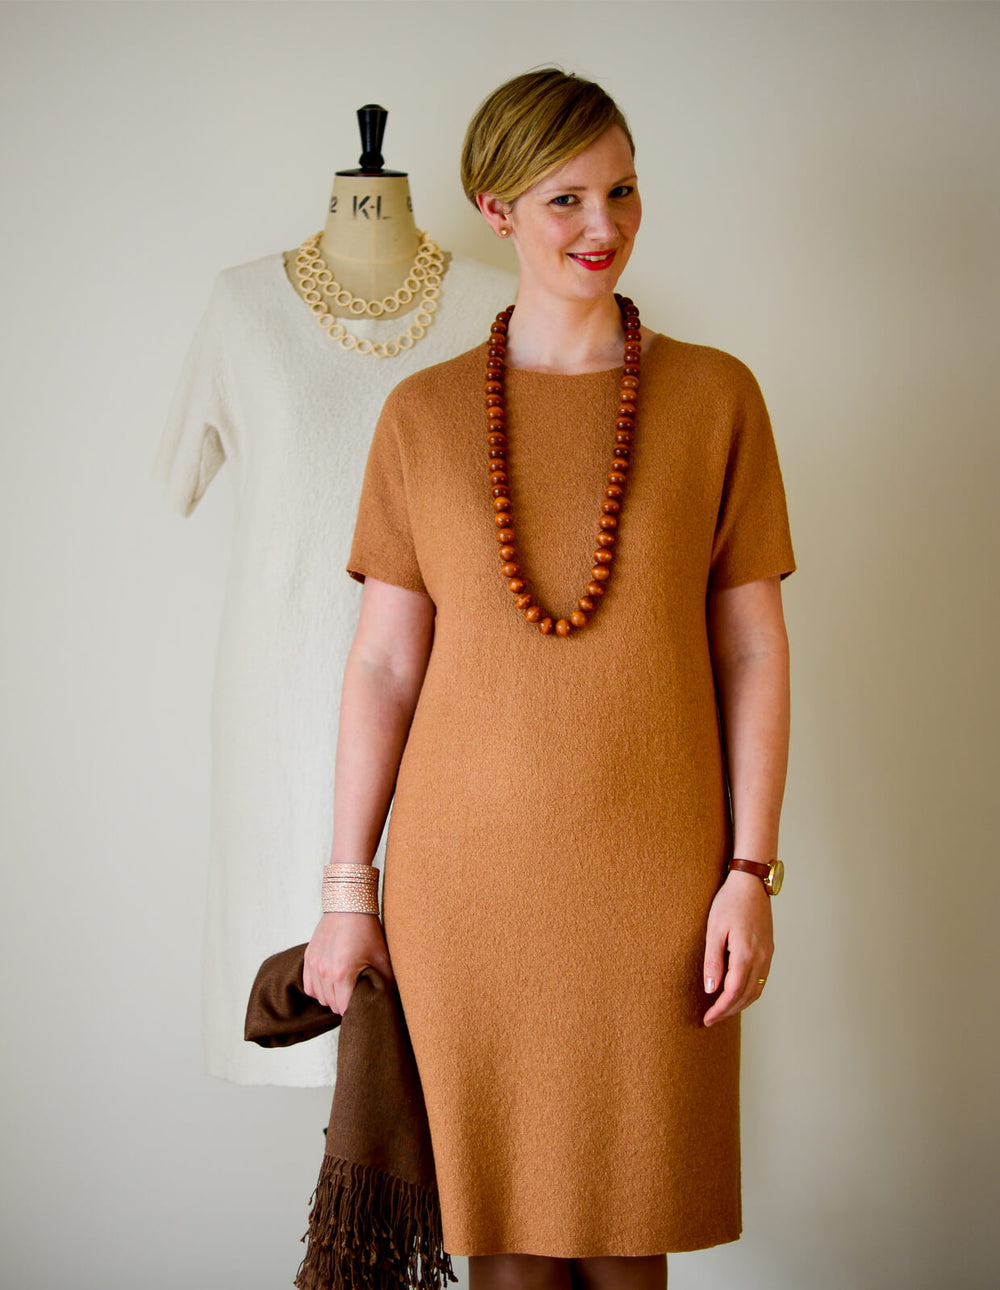 Woman wearing the Shell Dress sewing pattern from The Maker's Atelier on The Fold Line. A dress pattern made in felted and boiled wools or neoprene fabrics, featuring a shell shape, diamond insert under the arm, round neck, short sleeves, knee length hem 